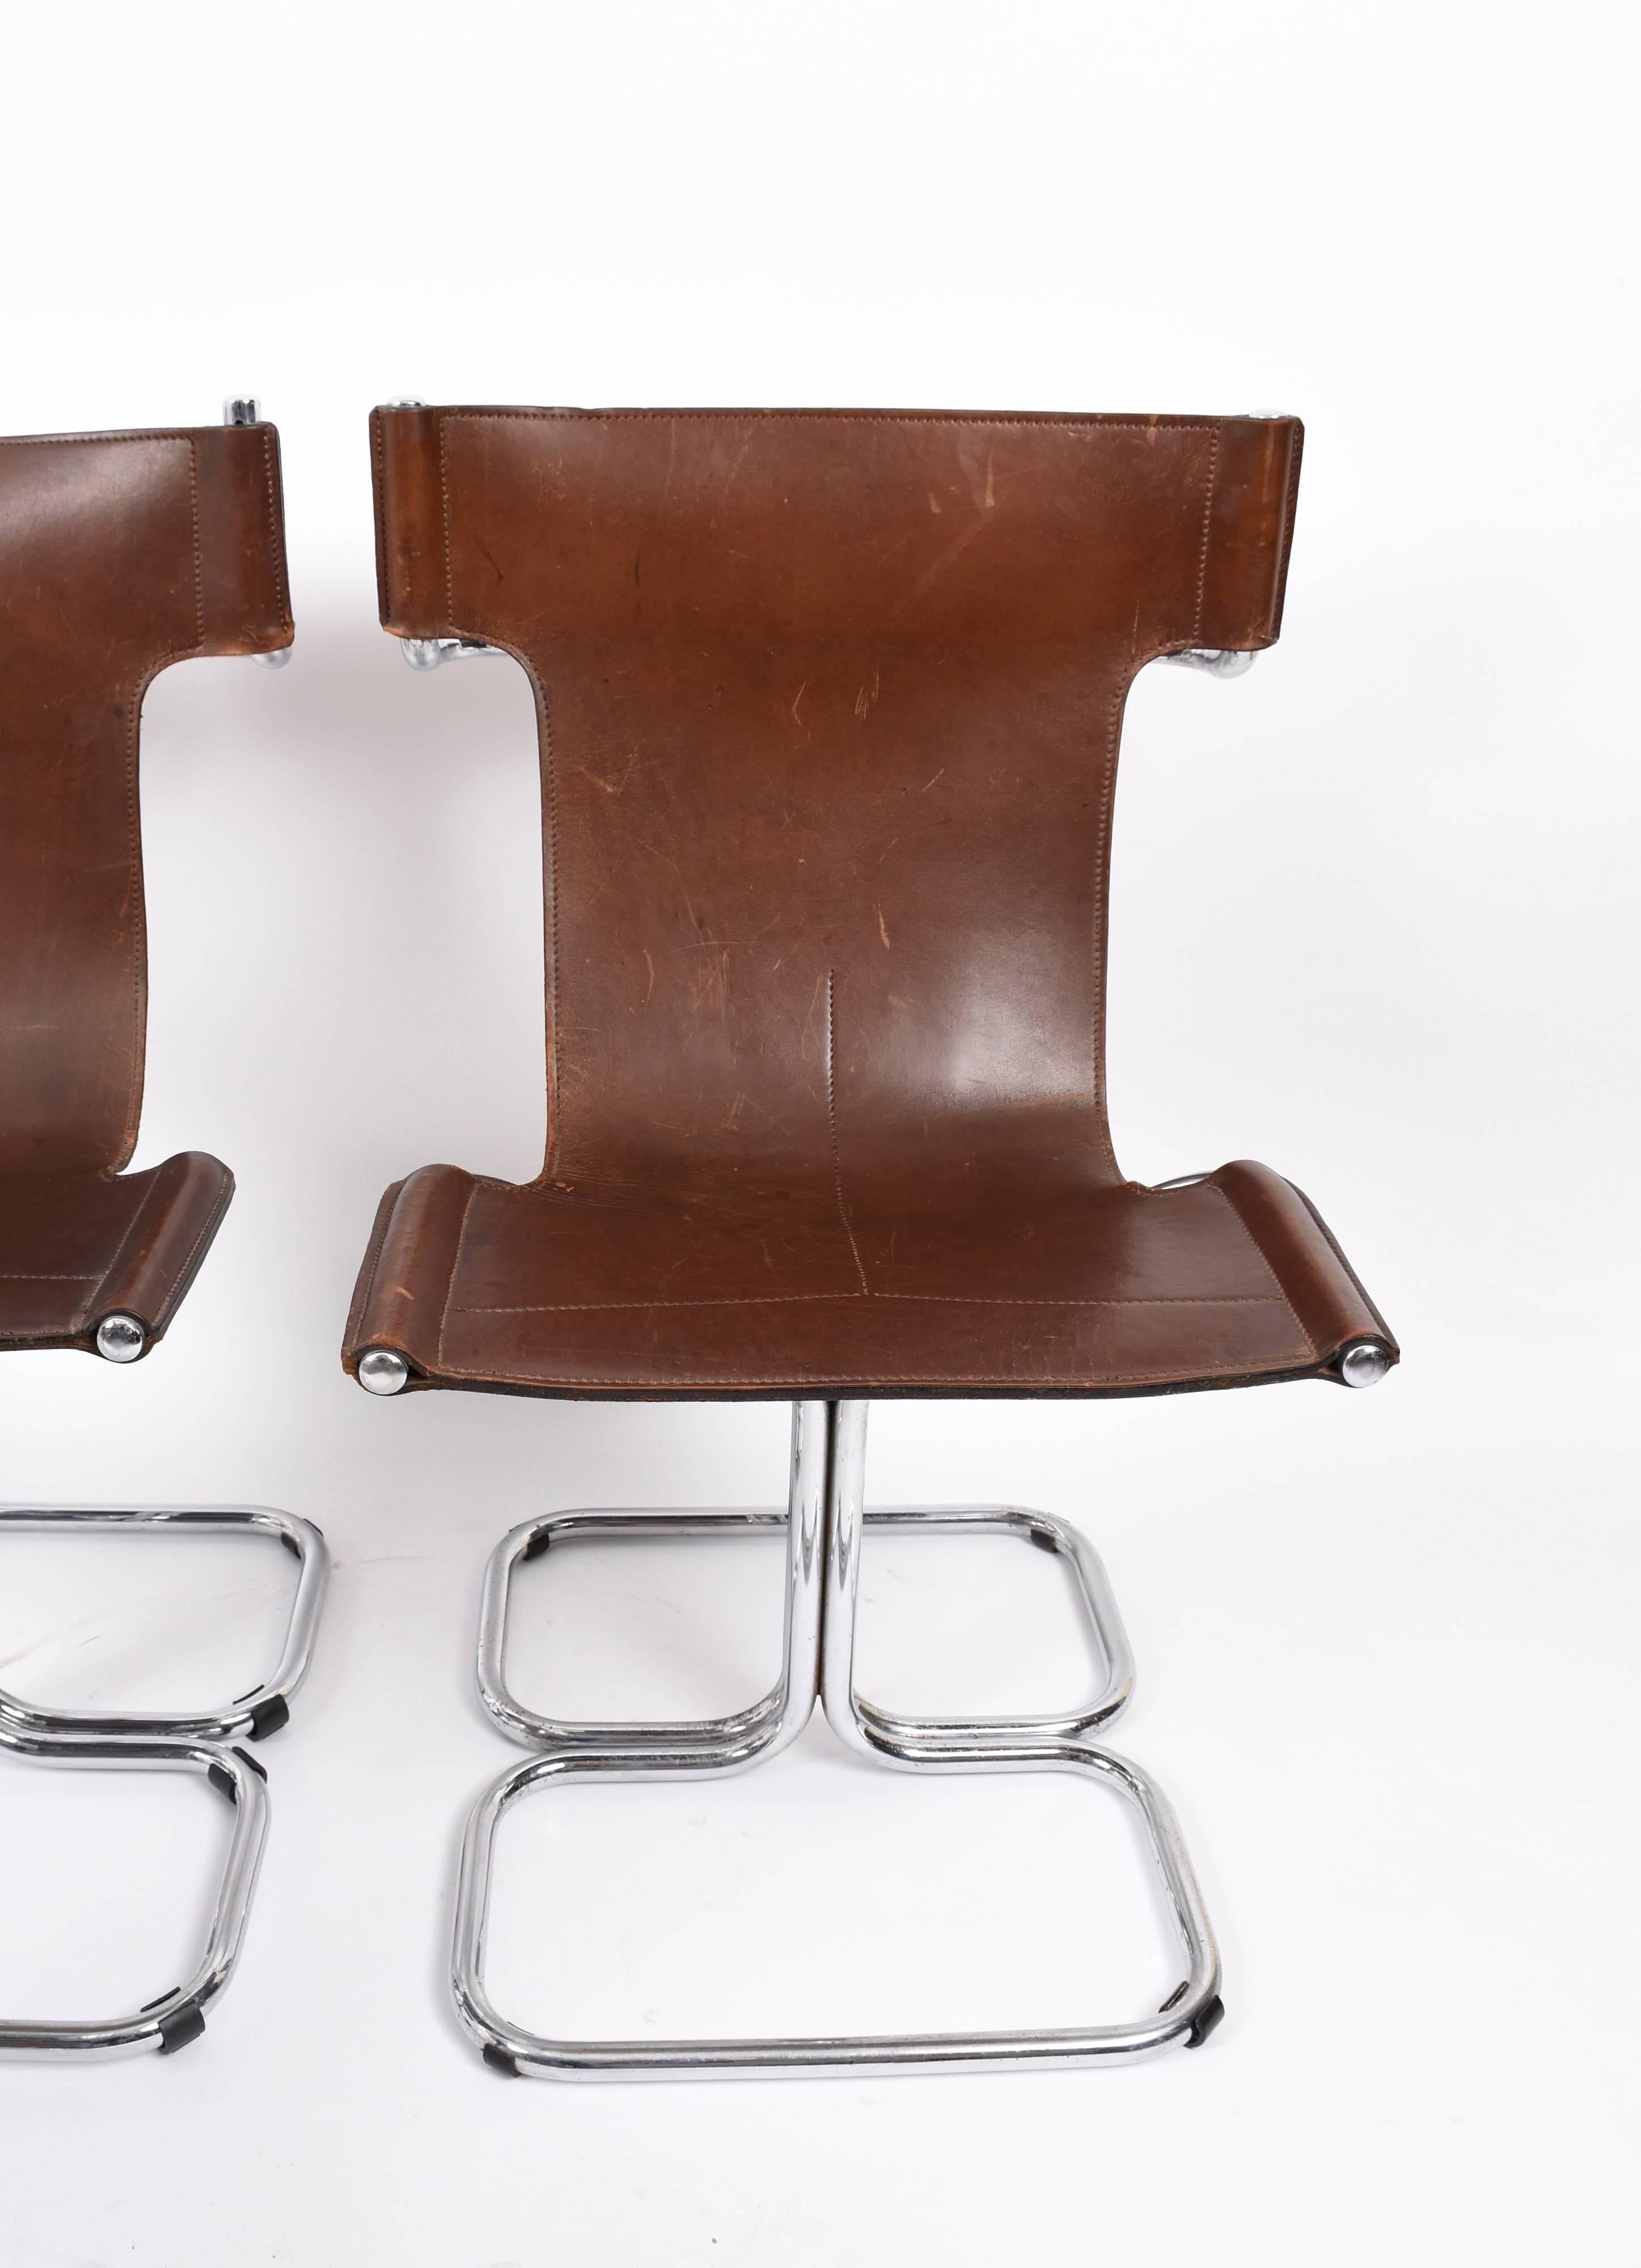 Amazing set of four chairs in original leather condition with tubular steel legs, they were produced in Italy during 1970s by master designer Faleschini.

They are numbered and with initial IF. They have a beautiful leather seam to emphasize its